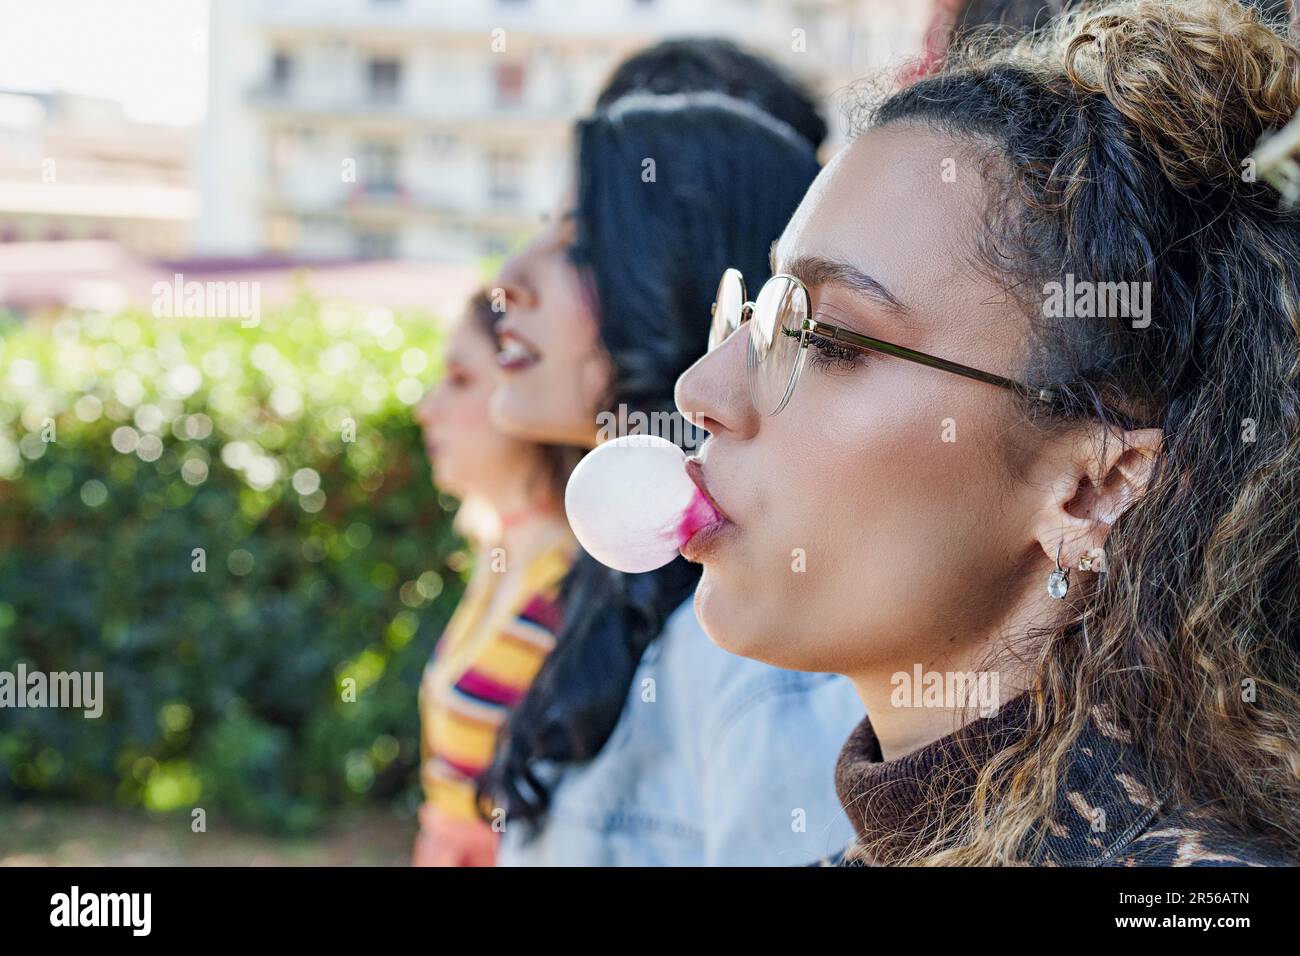 Caucasian woman blowing up a chewing gum balloon in a public park. Playful and carefree atmosphere with friends in the background Stock Photo